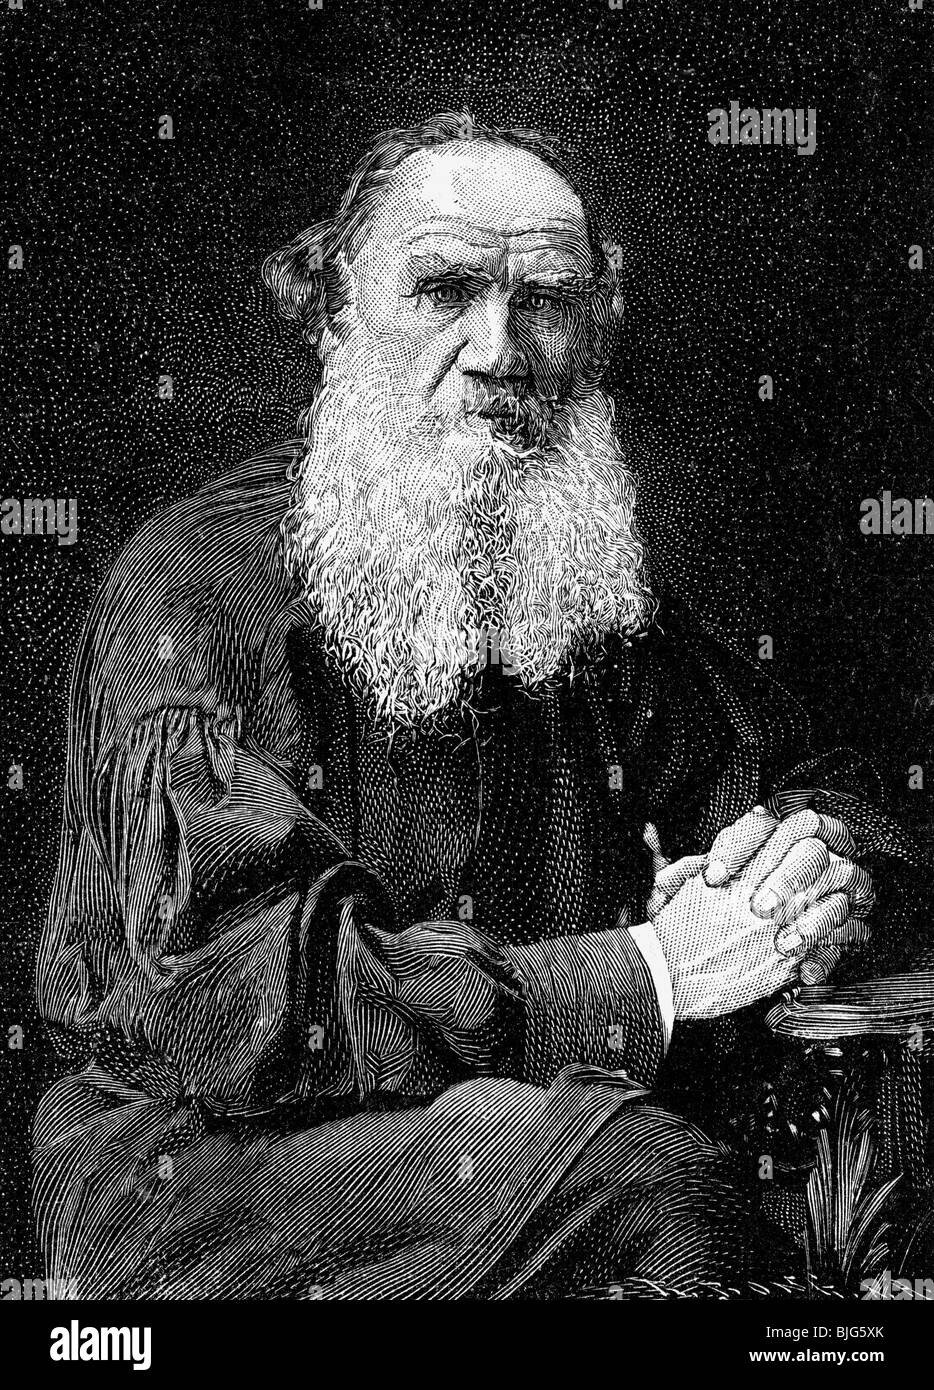 Tolstoy, Lev Nikolayevich, 9.9.1825 - 20.11.1910, Russian author / writer, portrait, wood engraving, 1905, , Stock Photo